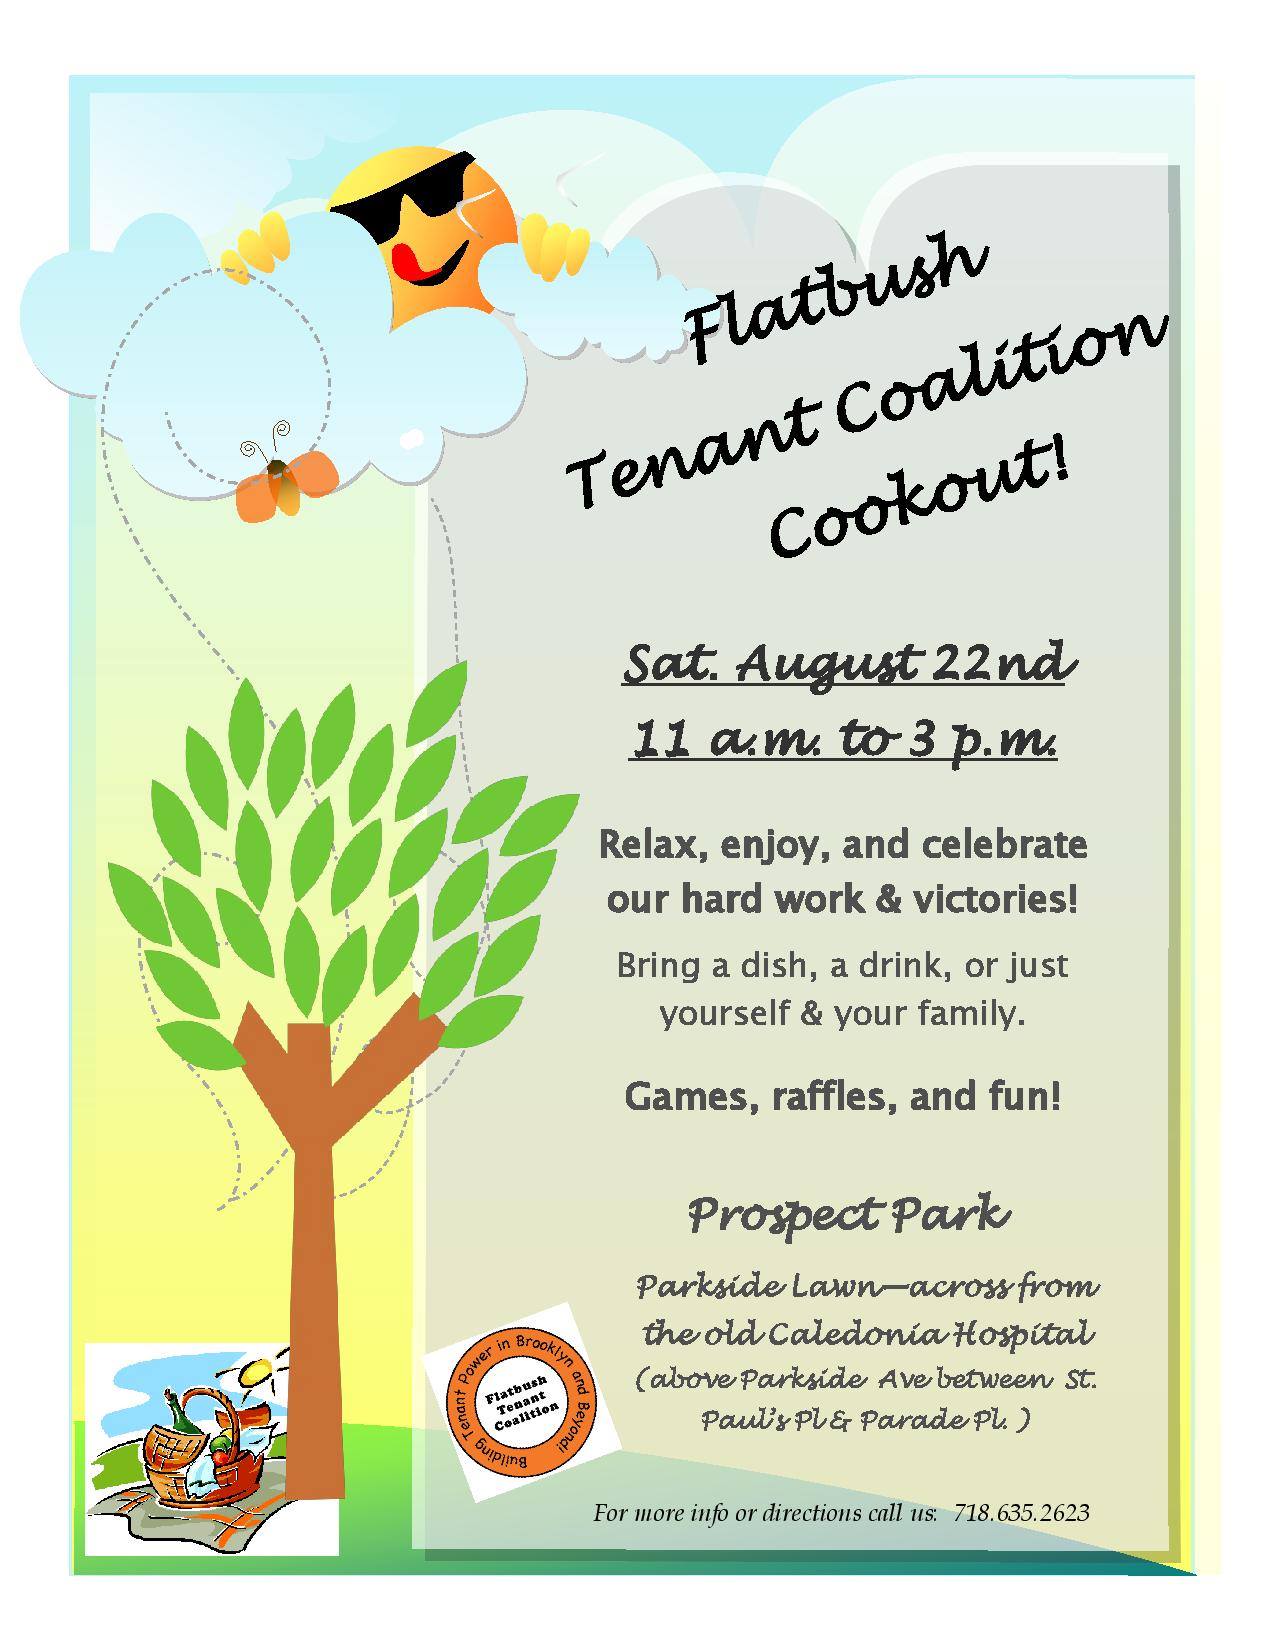 Join The Flatbush Tenant Coalition For A Cookout In Prospect Park This Saturday, August 22